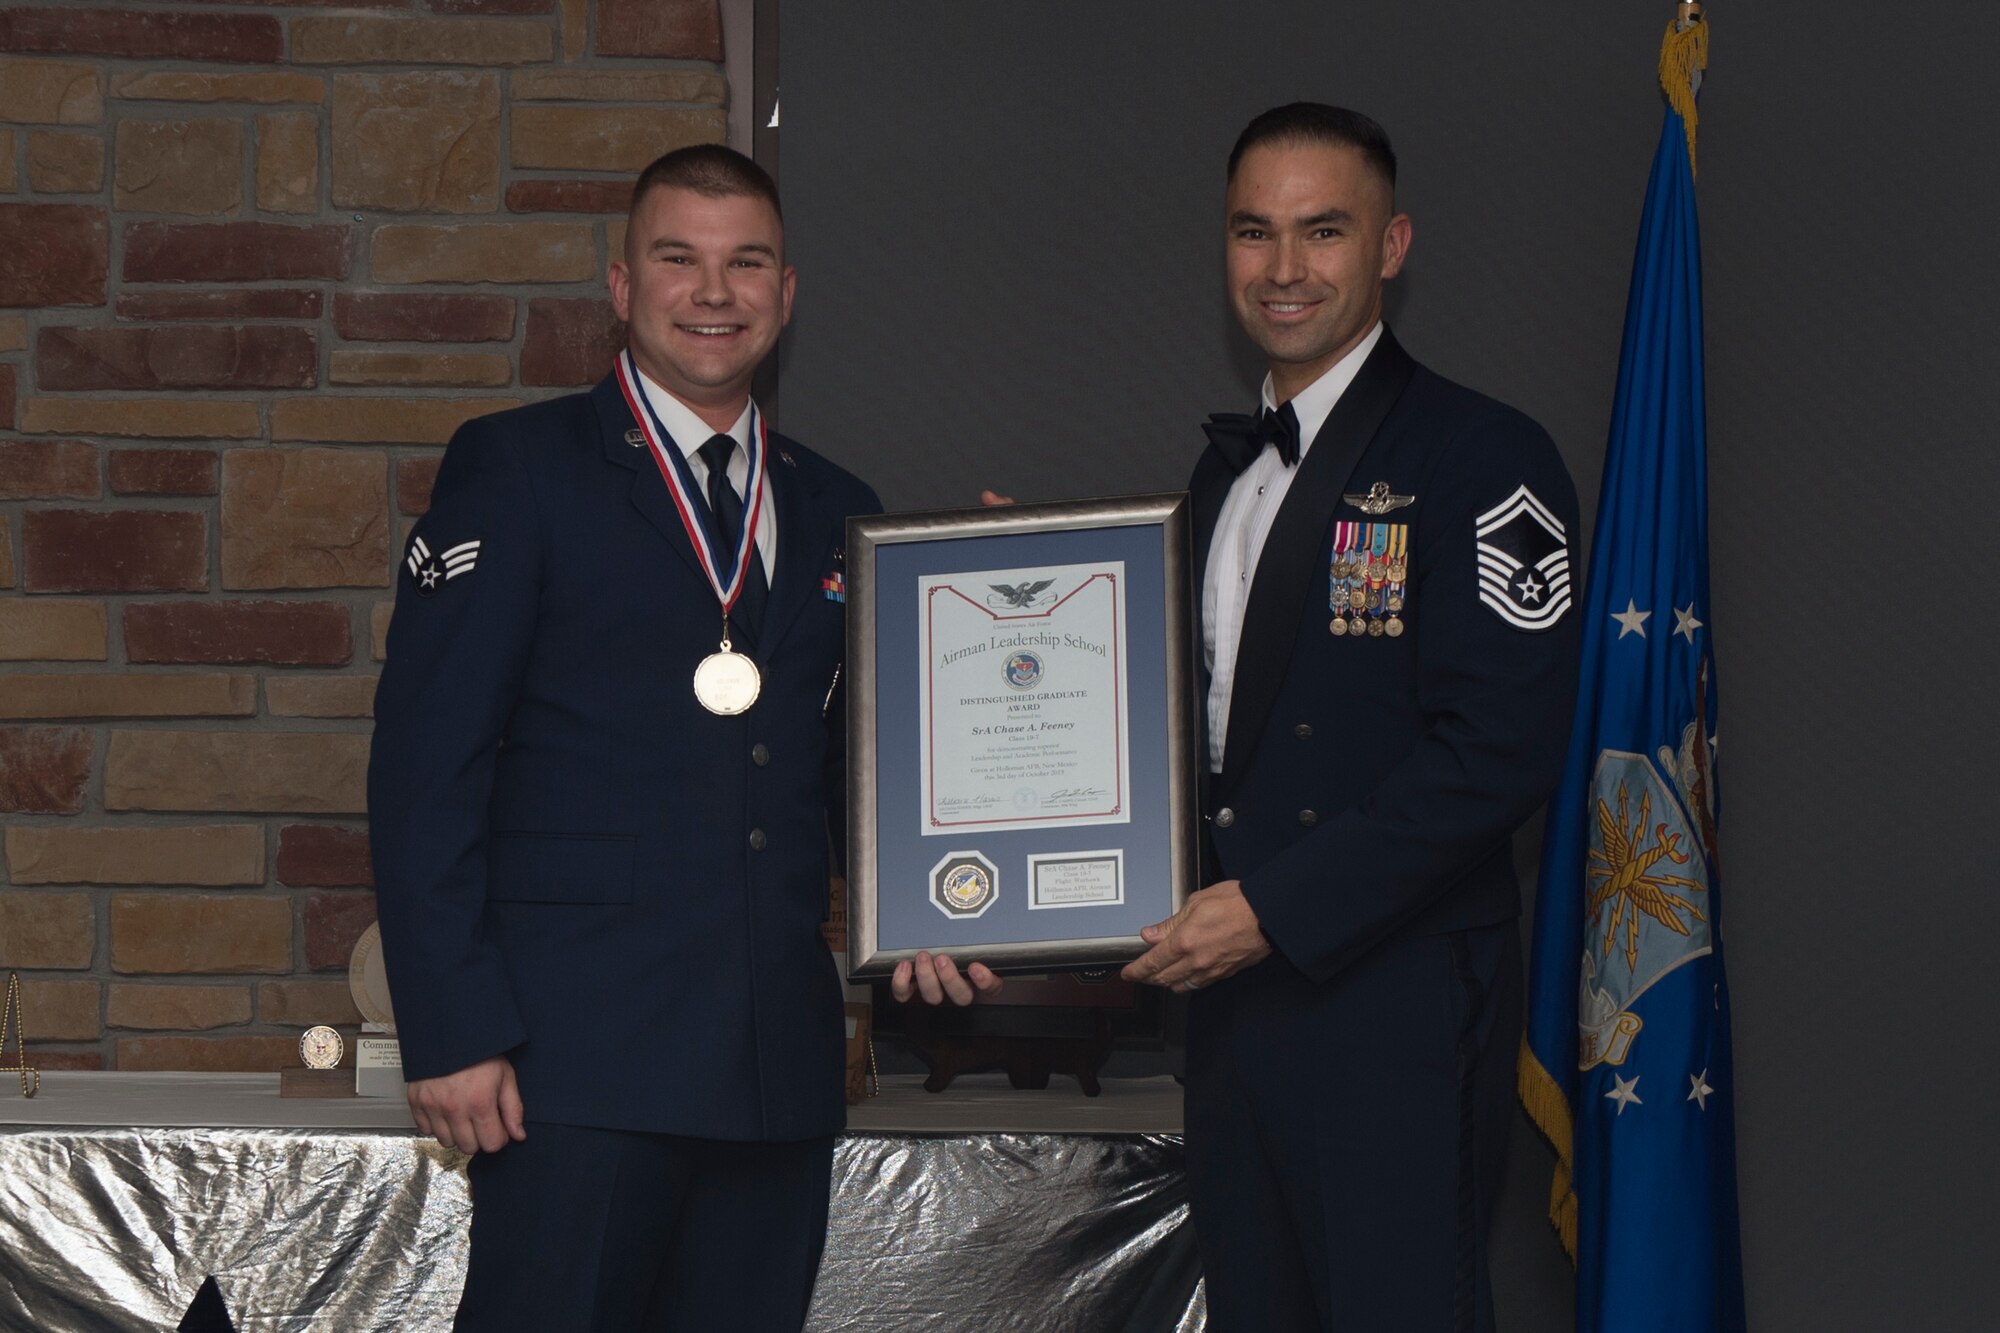 Senior Airman Chase Feeney, Airman Leadership School graduate, accepts the distinguished graduate award during the graduation of ALS class 19-7, October 10, 2019, on Holloman Air Force Base, N.M. The distinguished graduate award is presented to the top ten-percent of graduates for their performance in academic evaluations and demonstration of leadership. (U.S. Air Force photo by Airman 1st Class Kristin Weathersby)